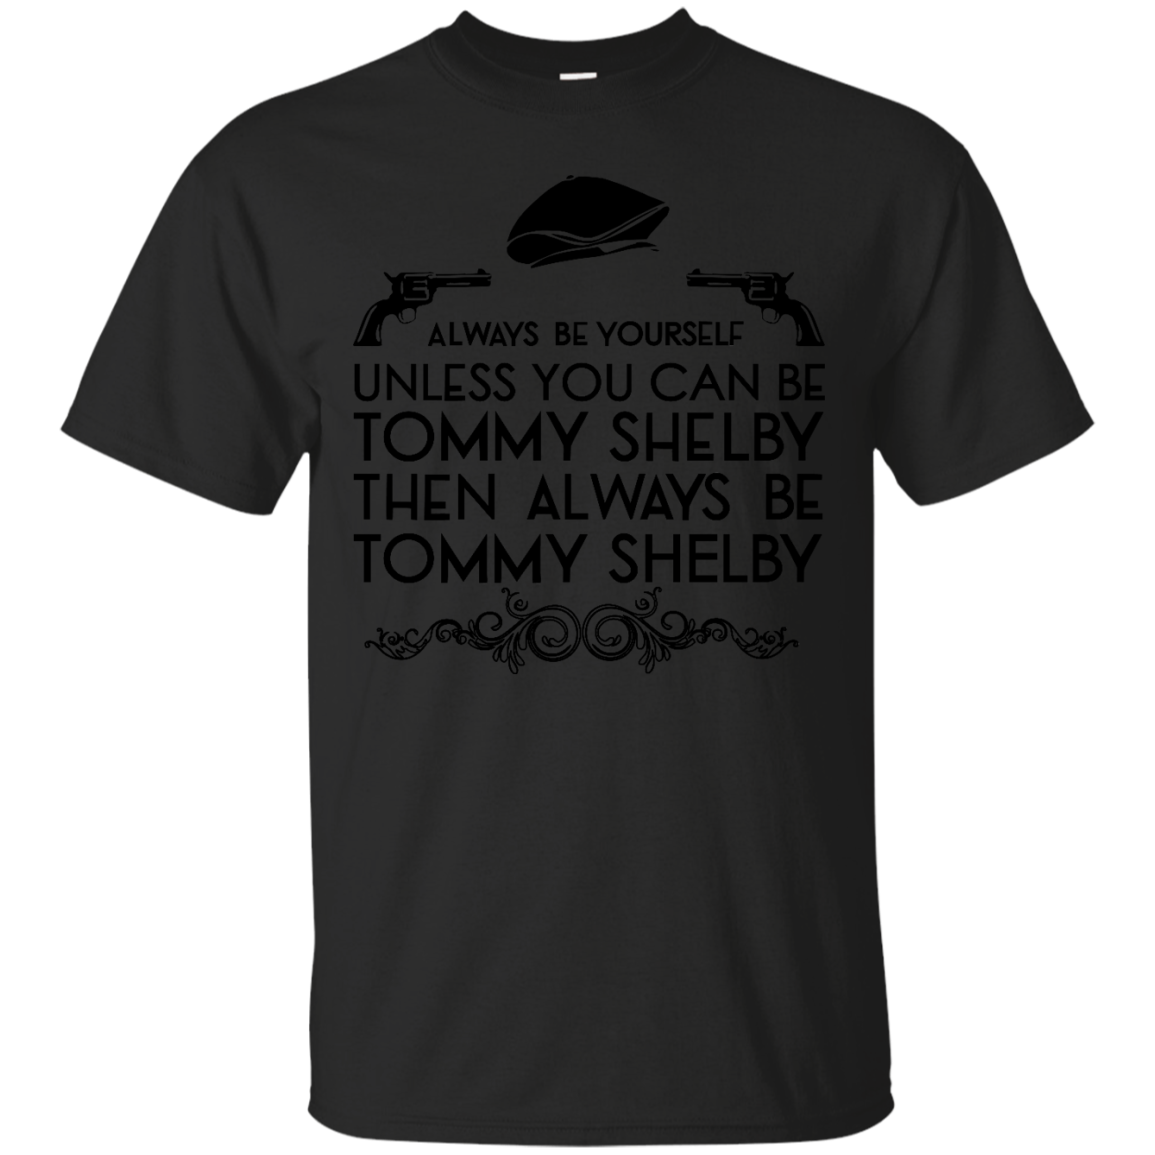 Tommy Shelby Shirts Always Be Yourself Unless You Can Be Tommy Shelby ...